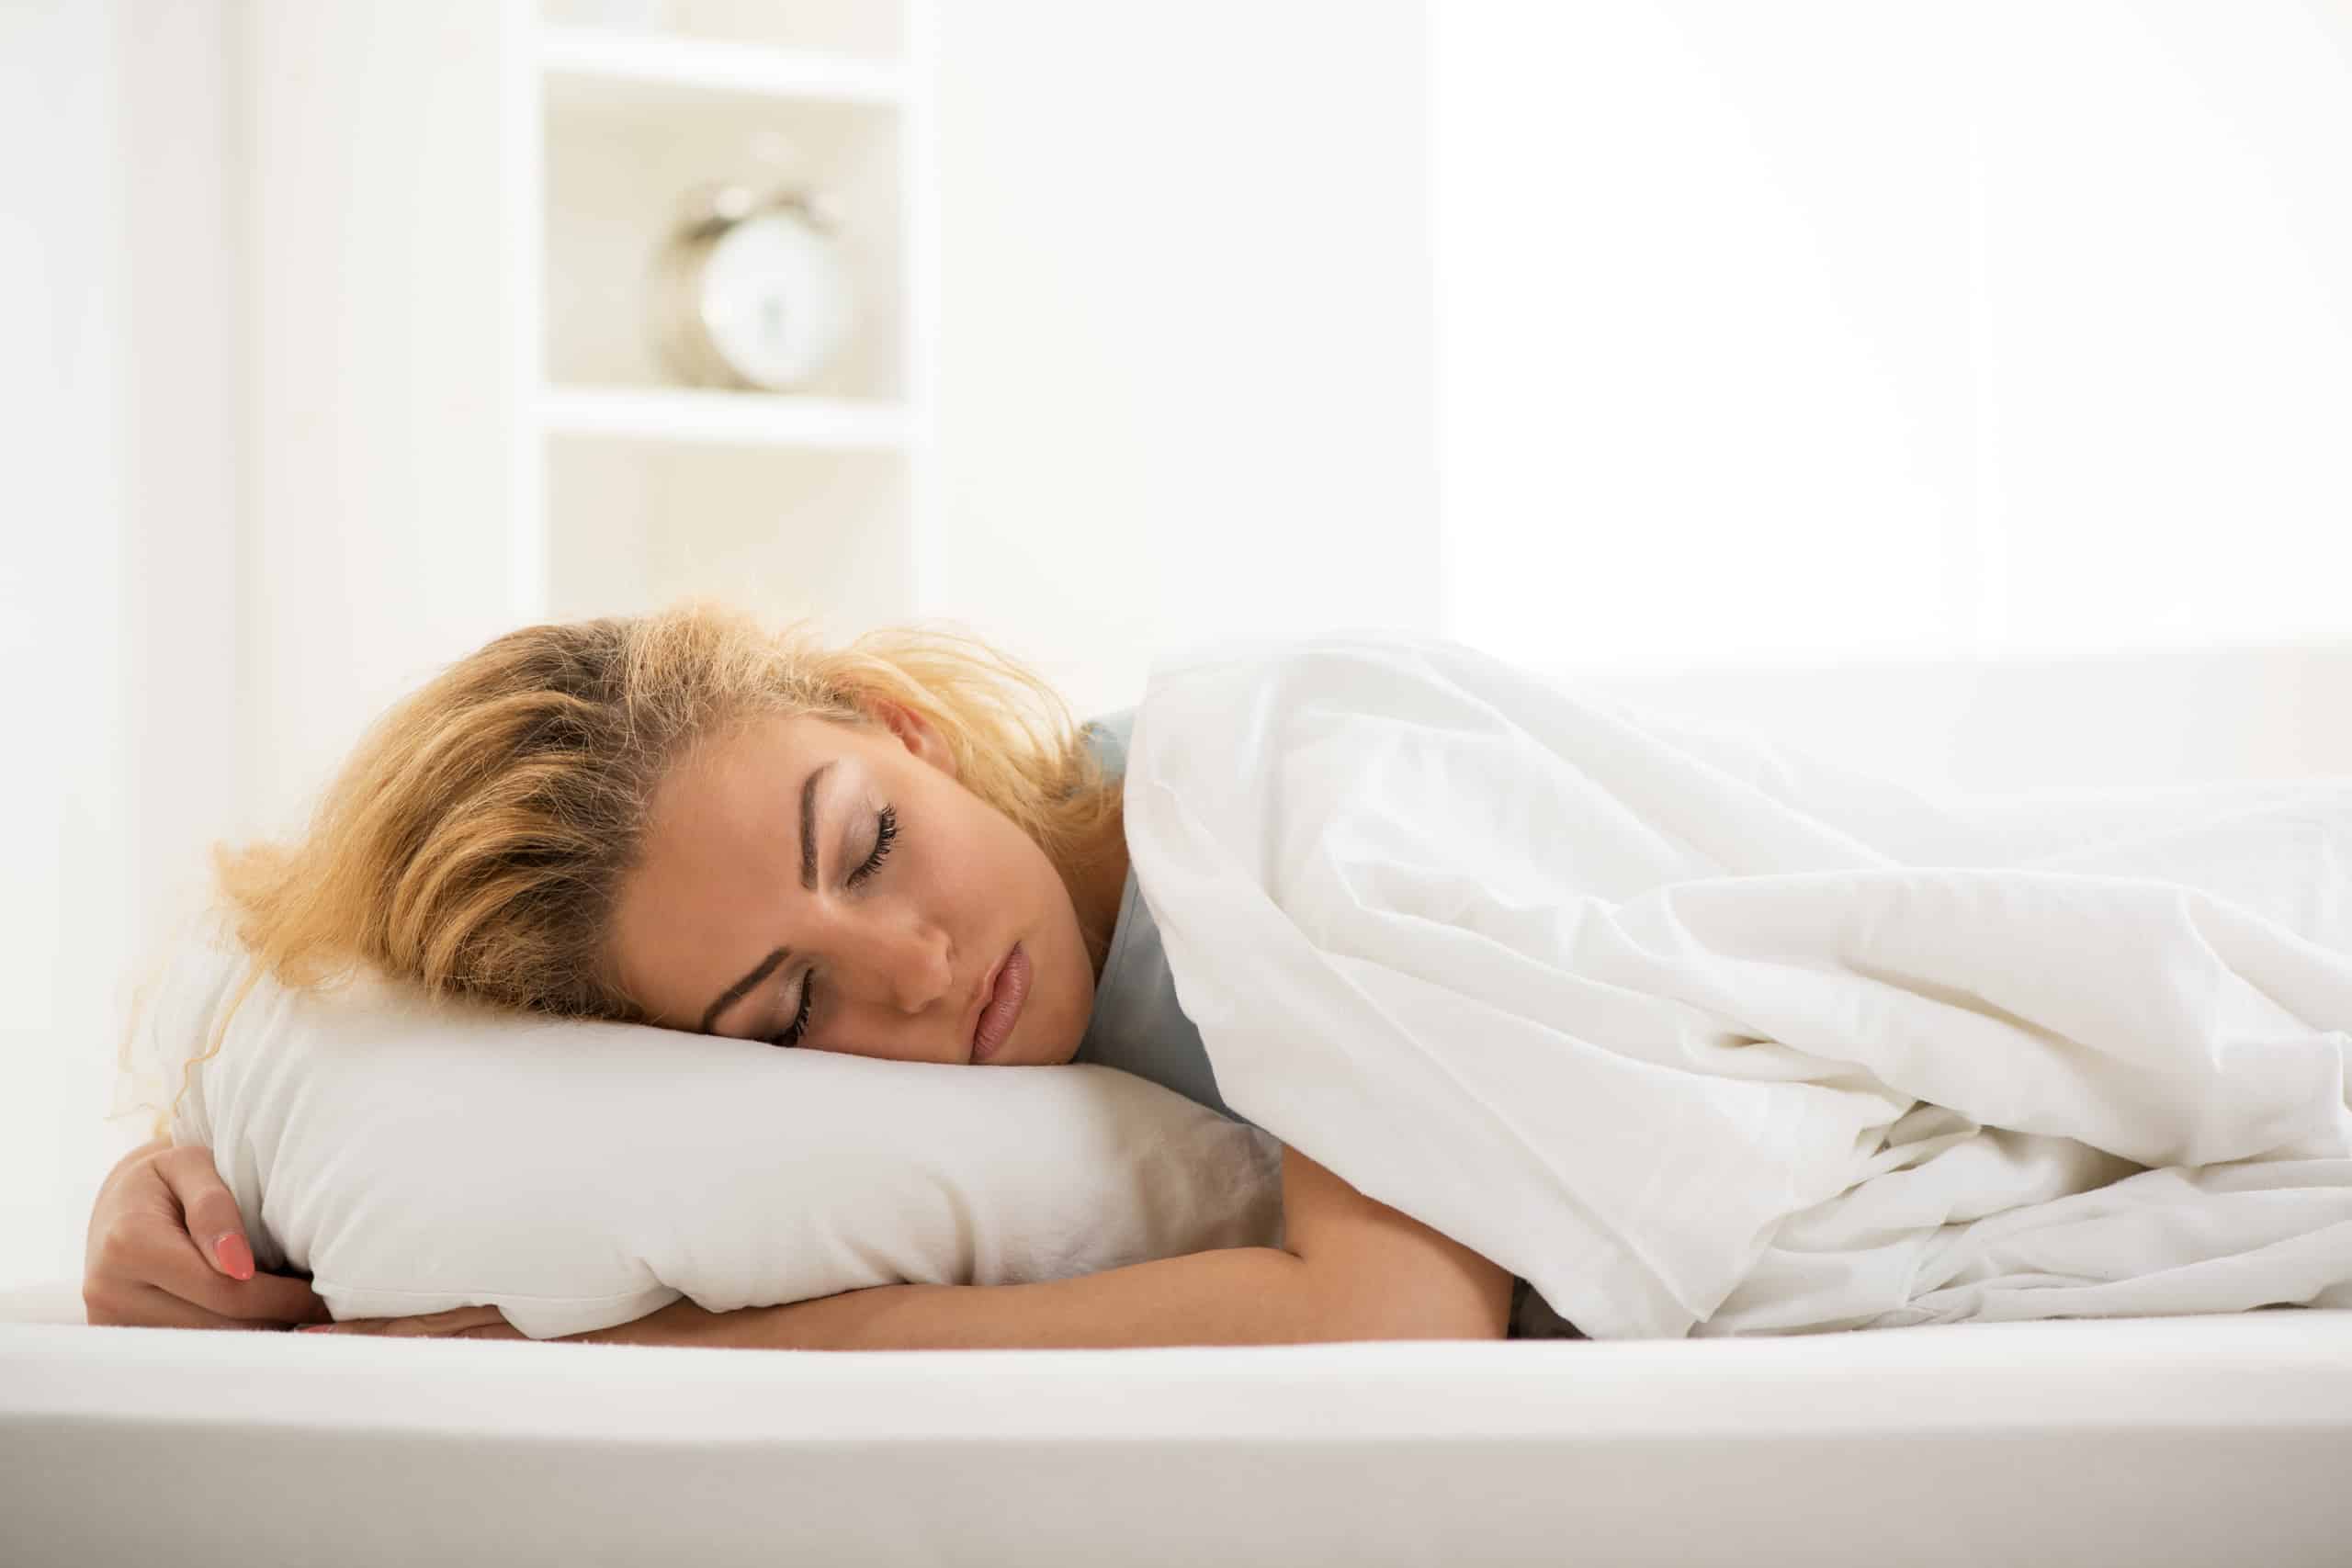 Choosing the Right Mattress to Support Your Back and Improve Sleep